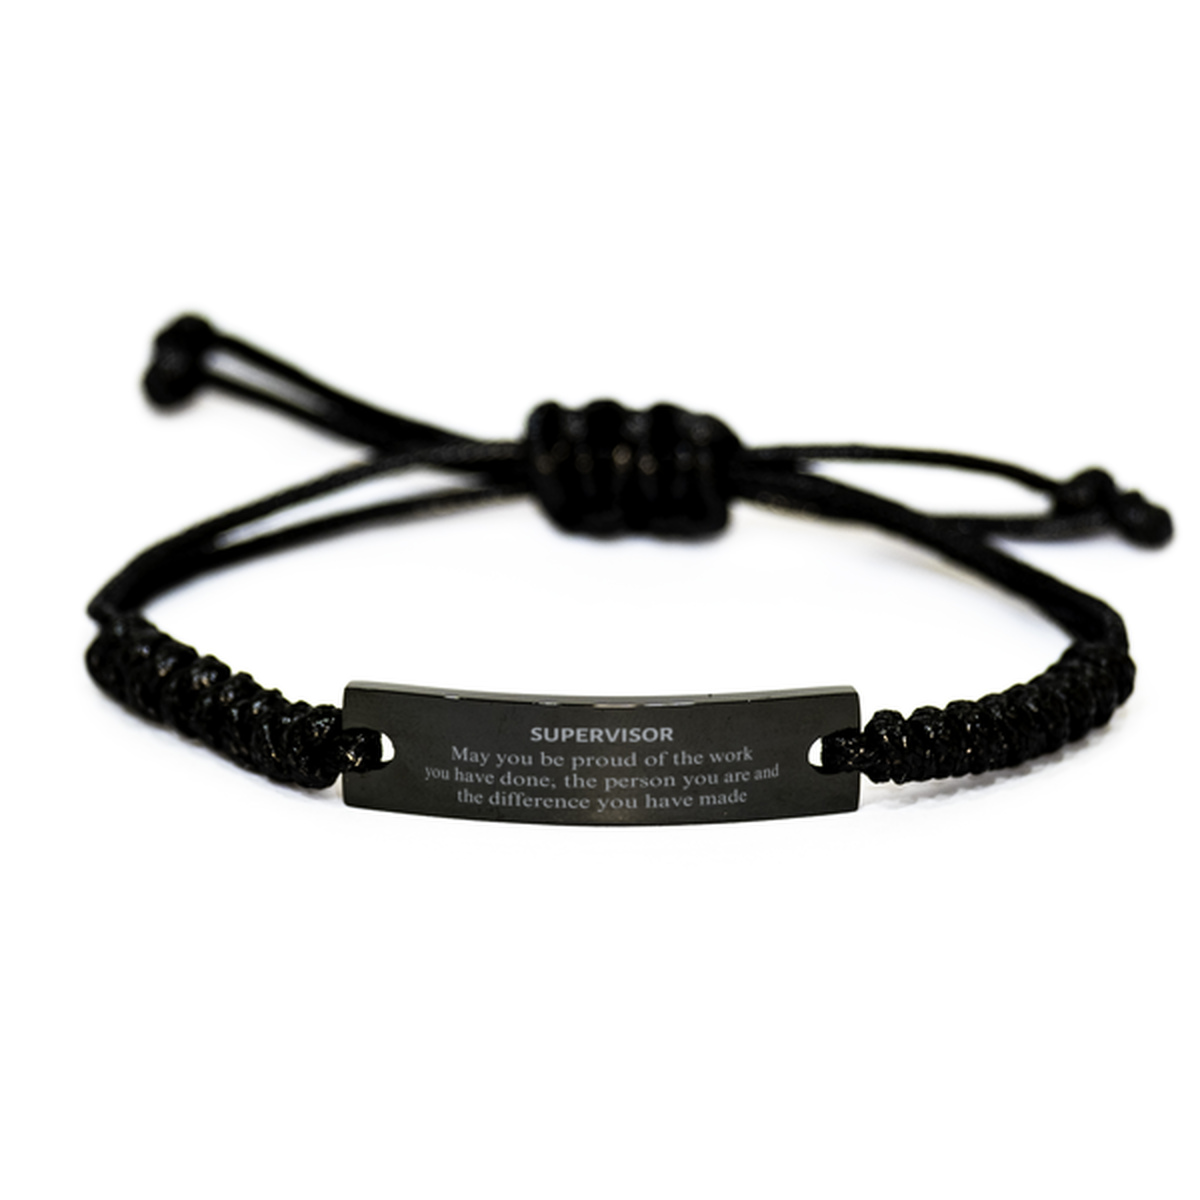 Supervisor May you be proud of the work you have done, Retirement Supervisor Black Rope Bracelet for Colleague Appreciation Gifts Amazing for Supervisor